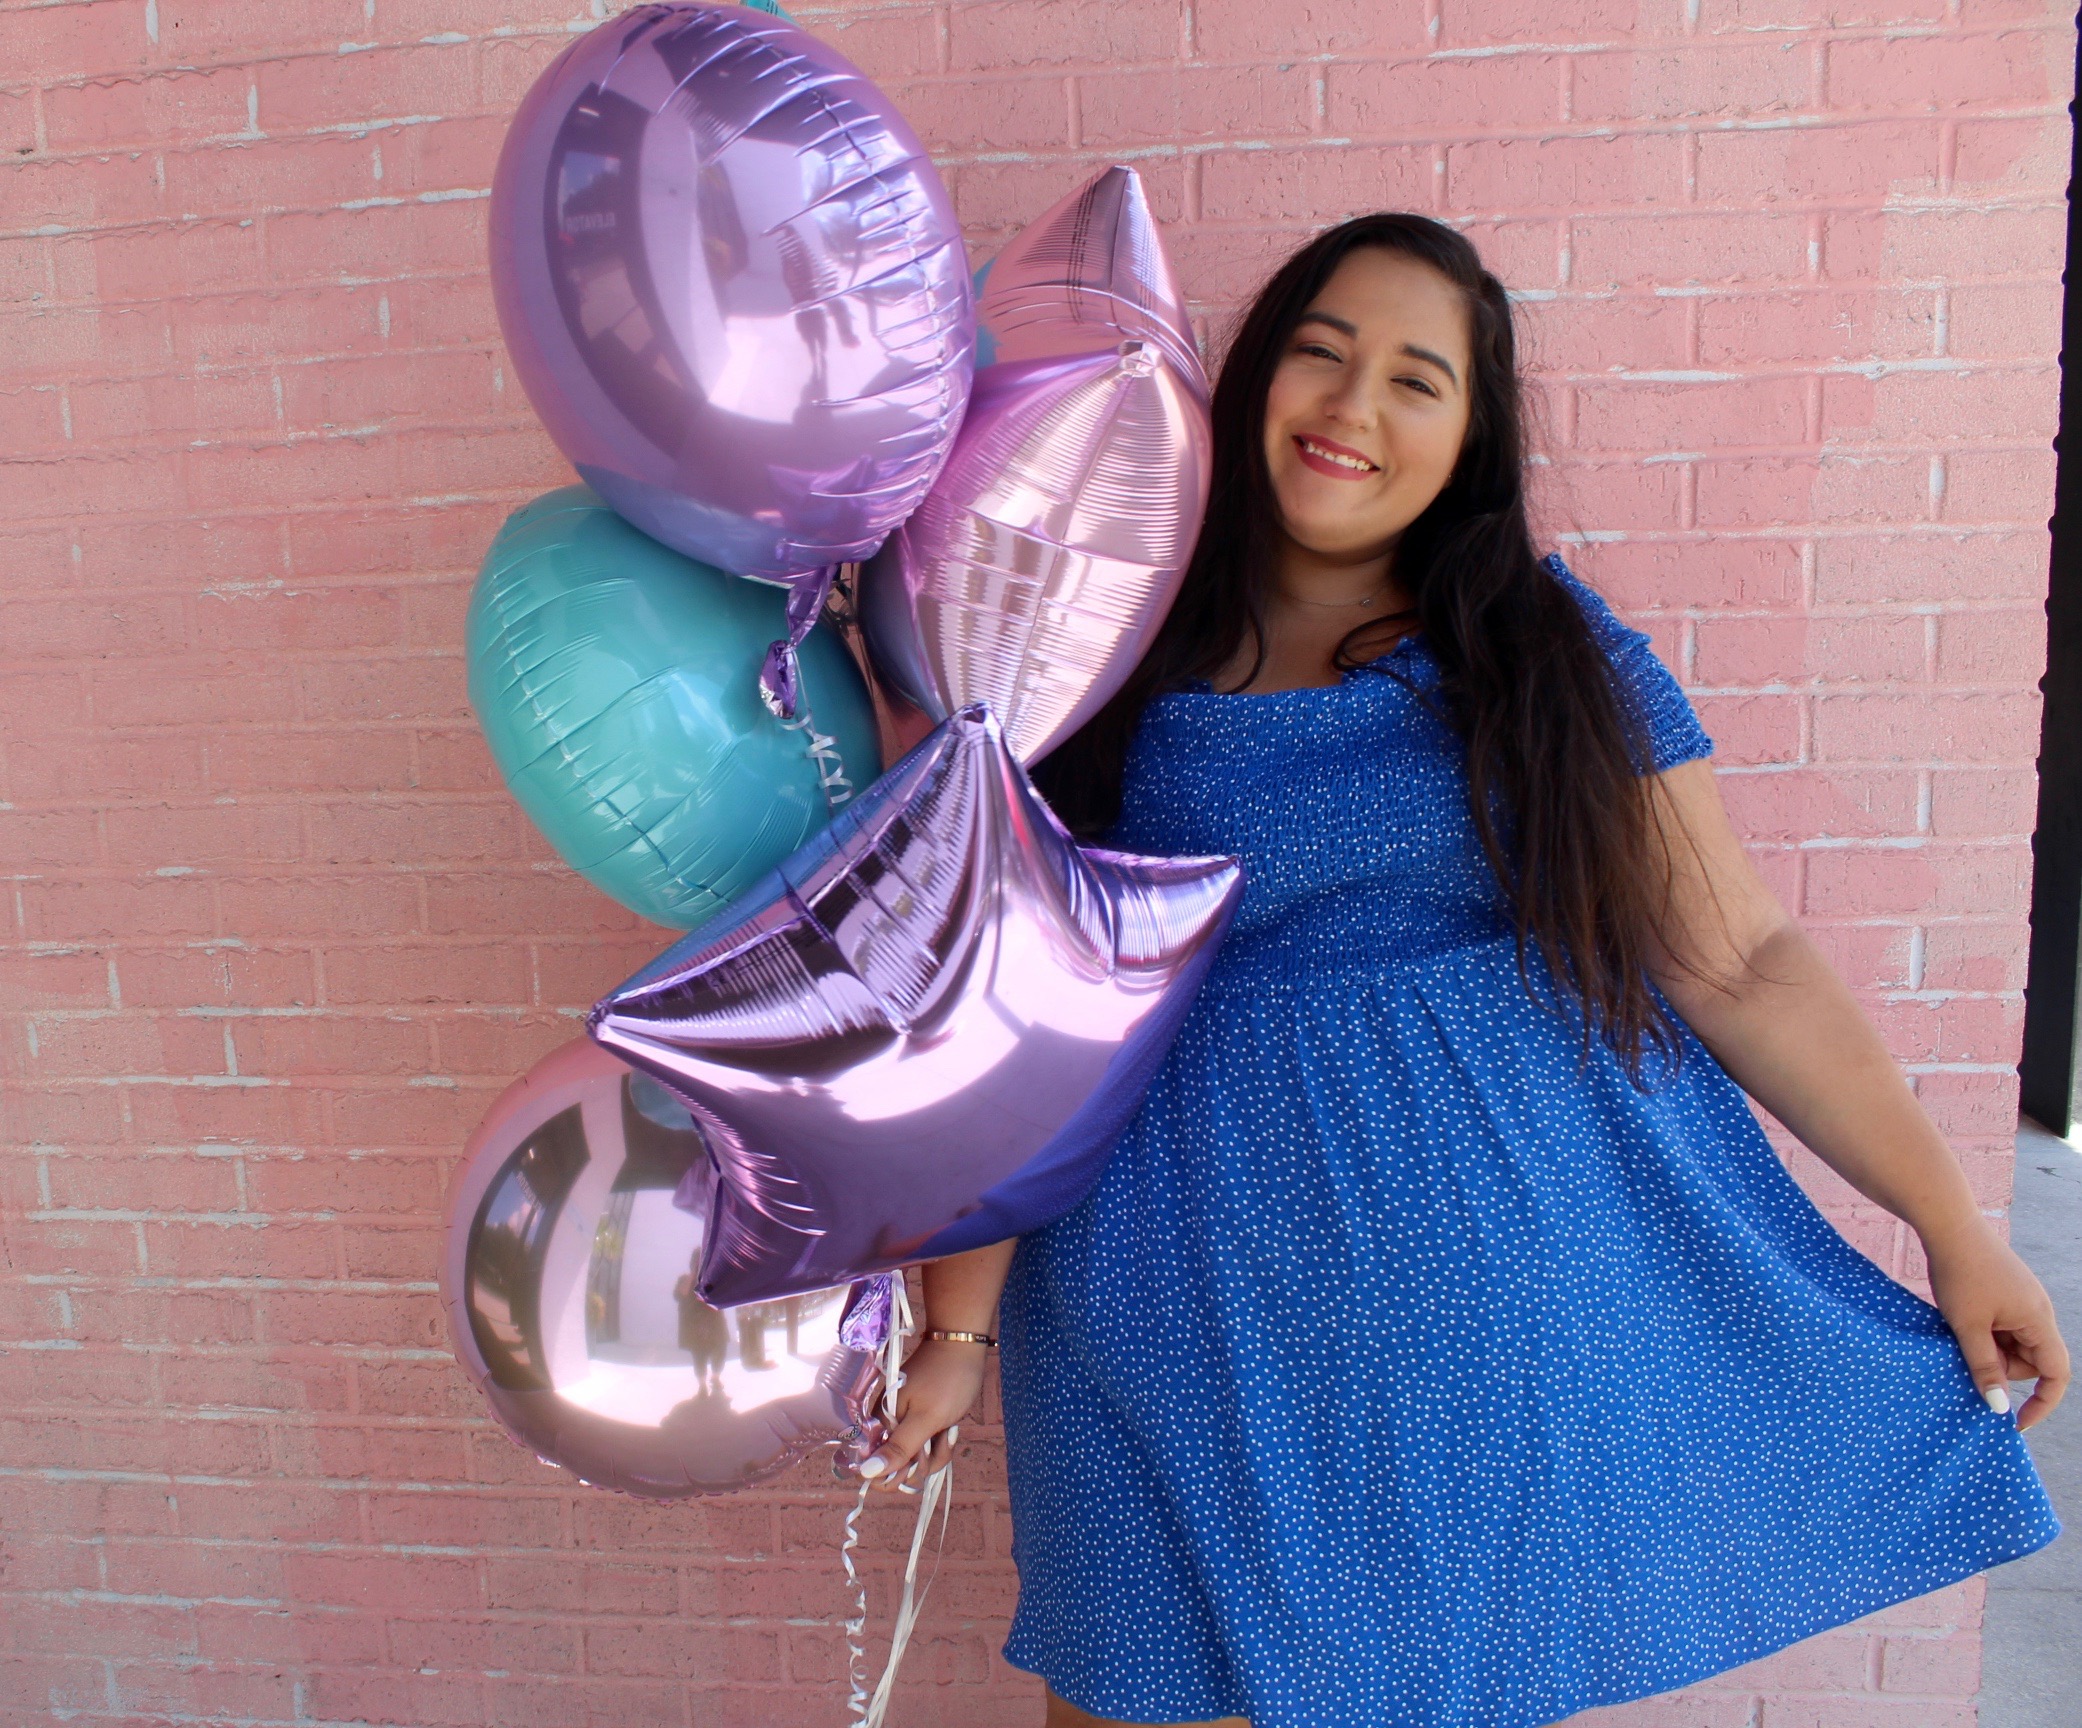 Happy 23rd Birthday To Me! – 23 Fun Facts About Me!